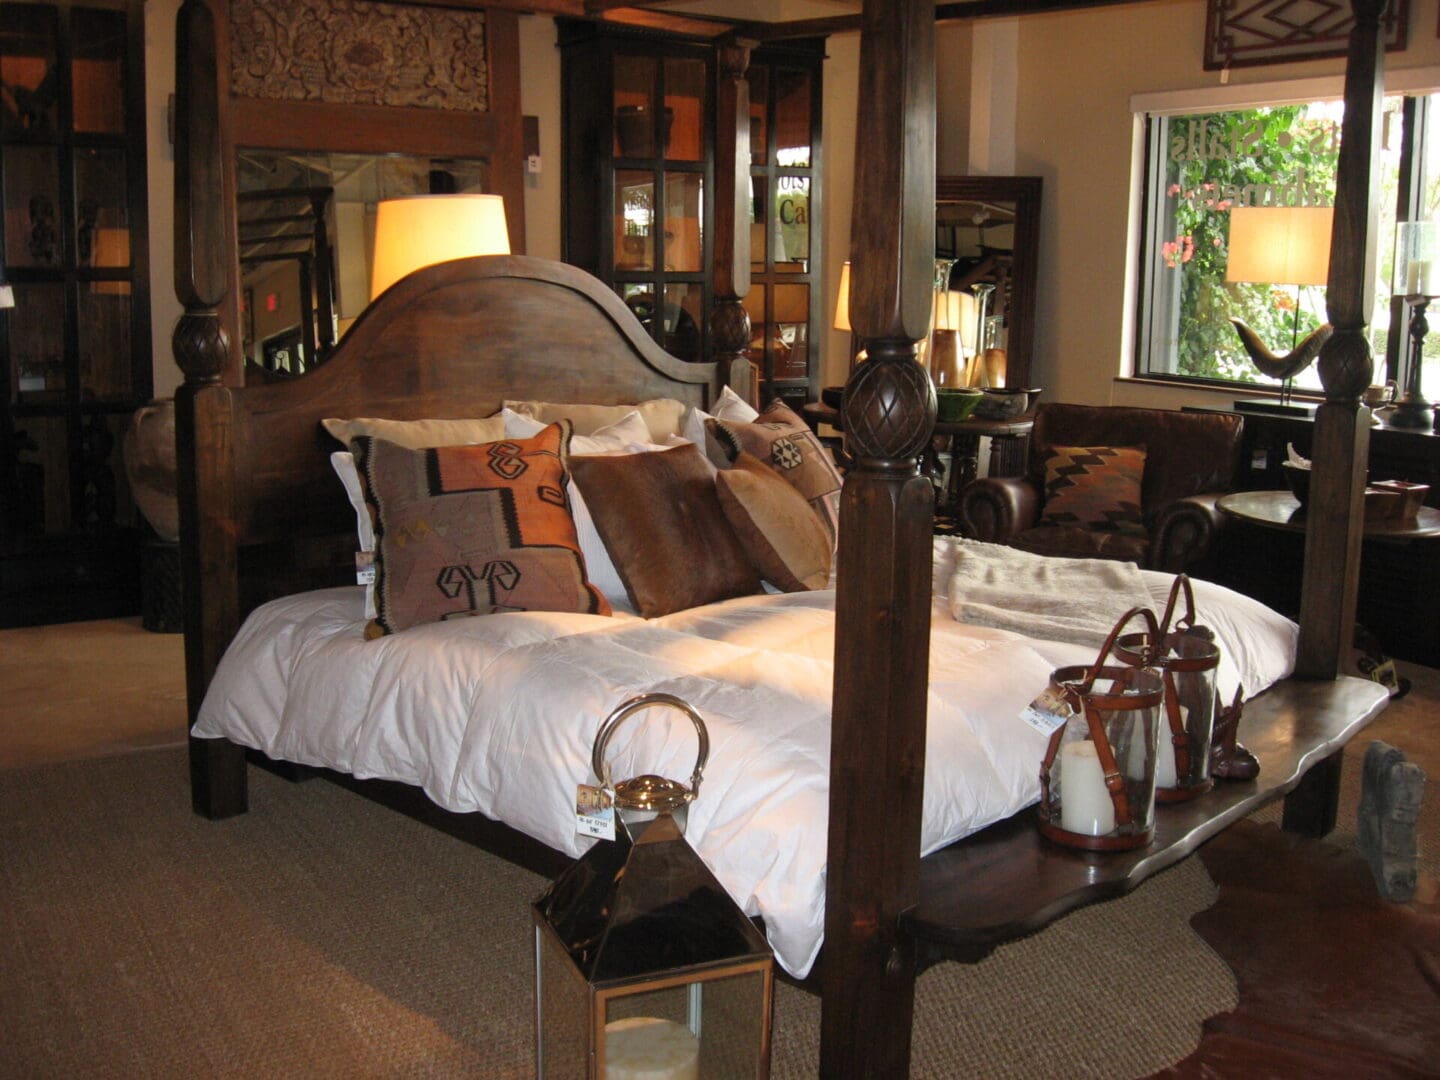 A bedroom with four poster bed and large mirror.